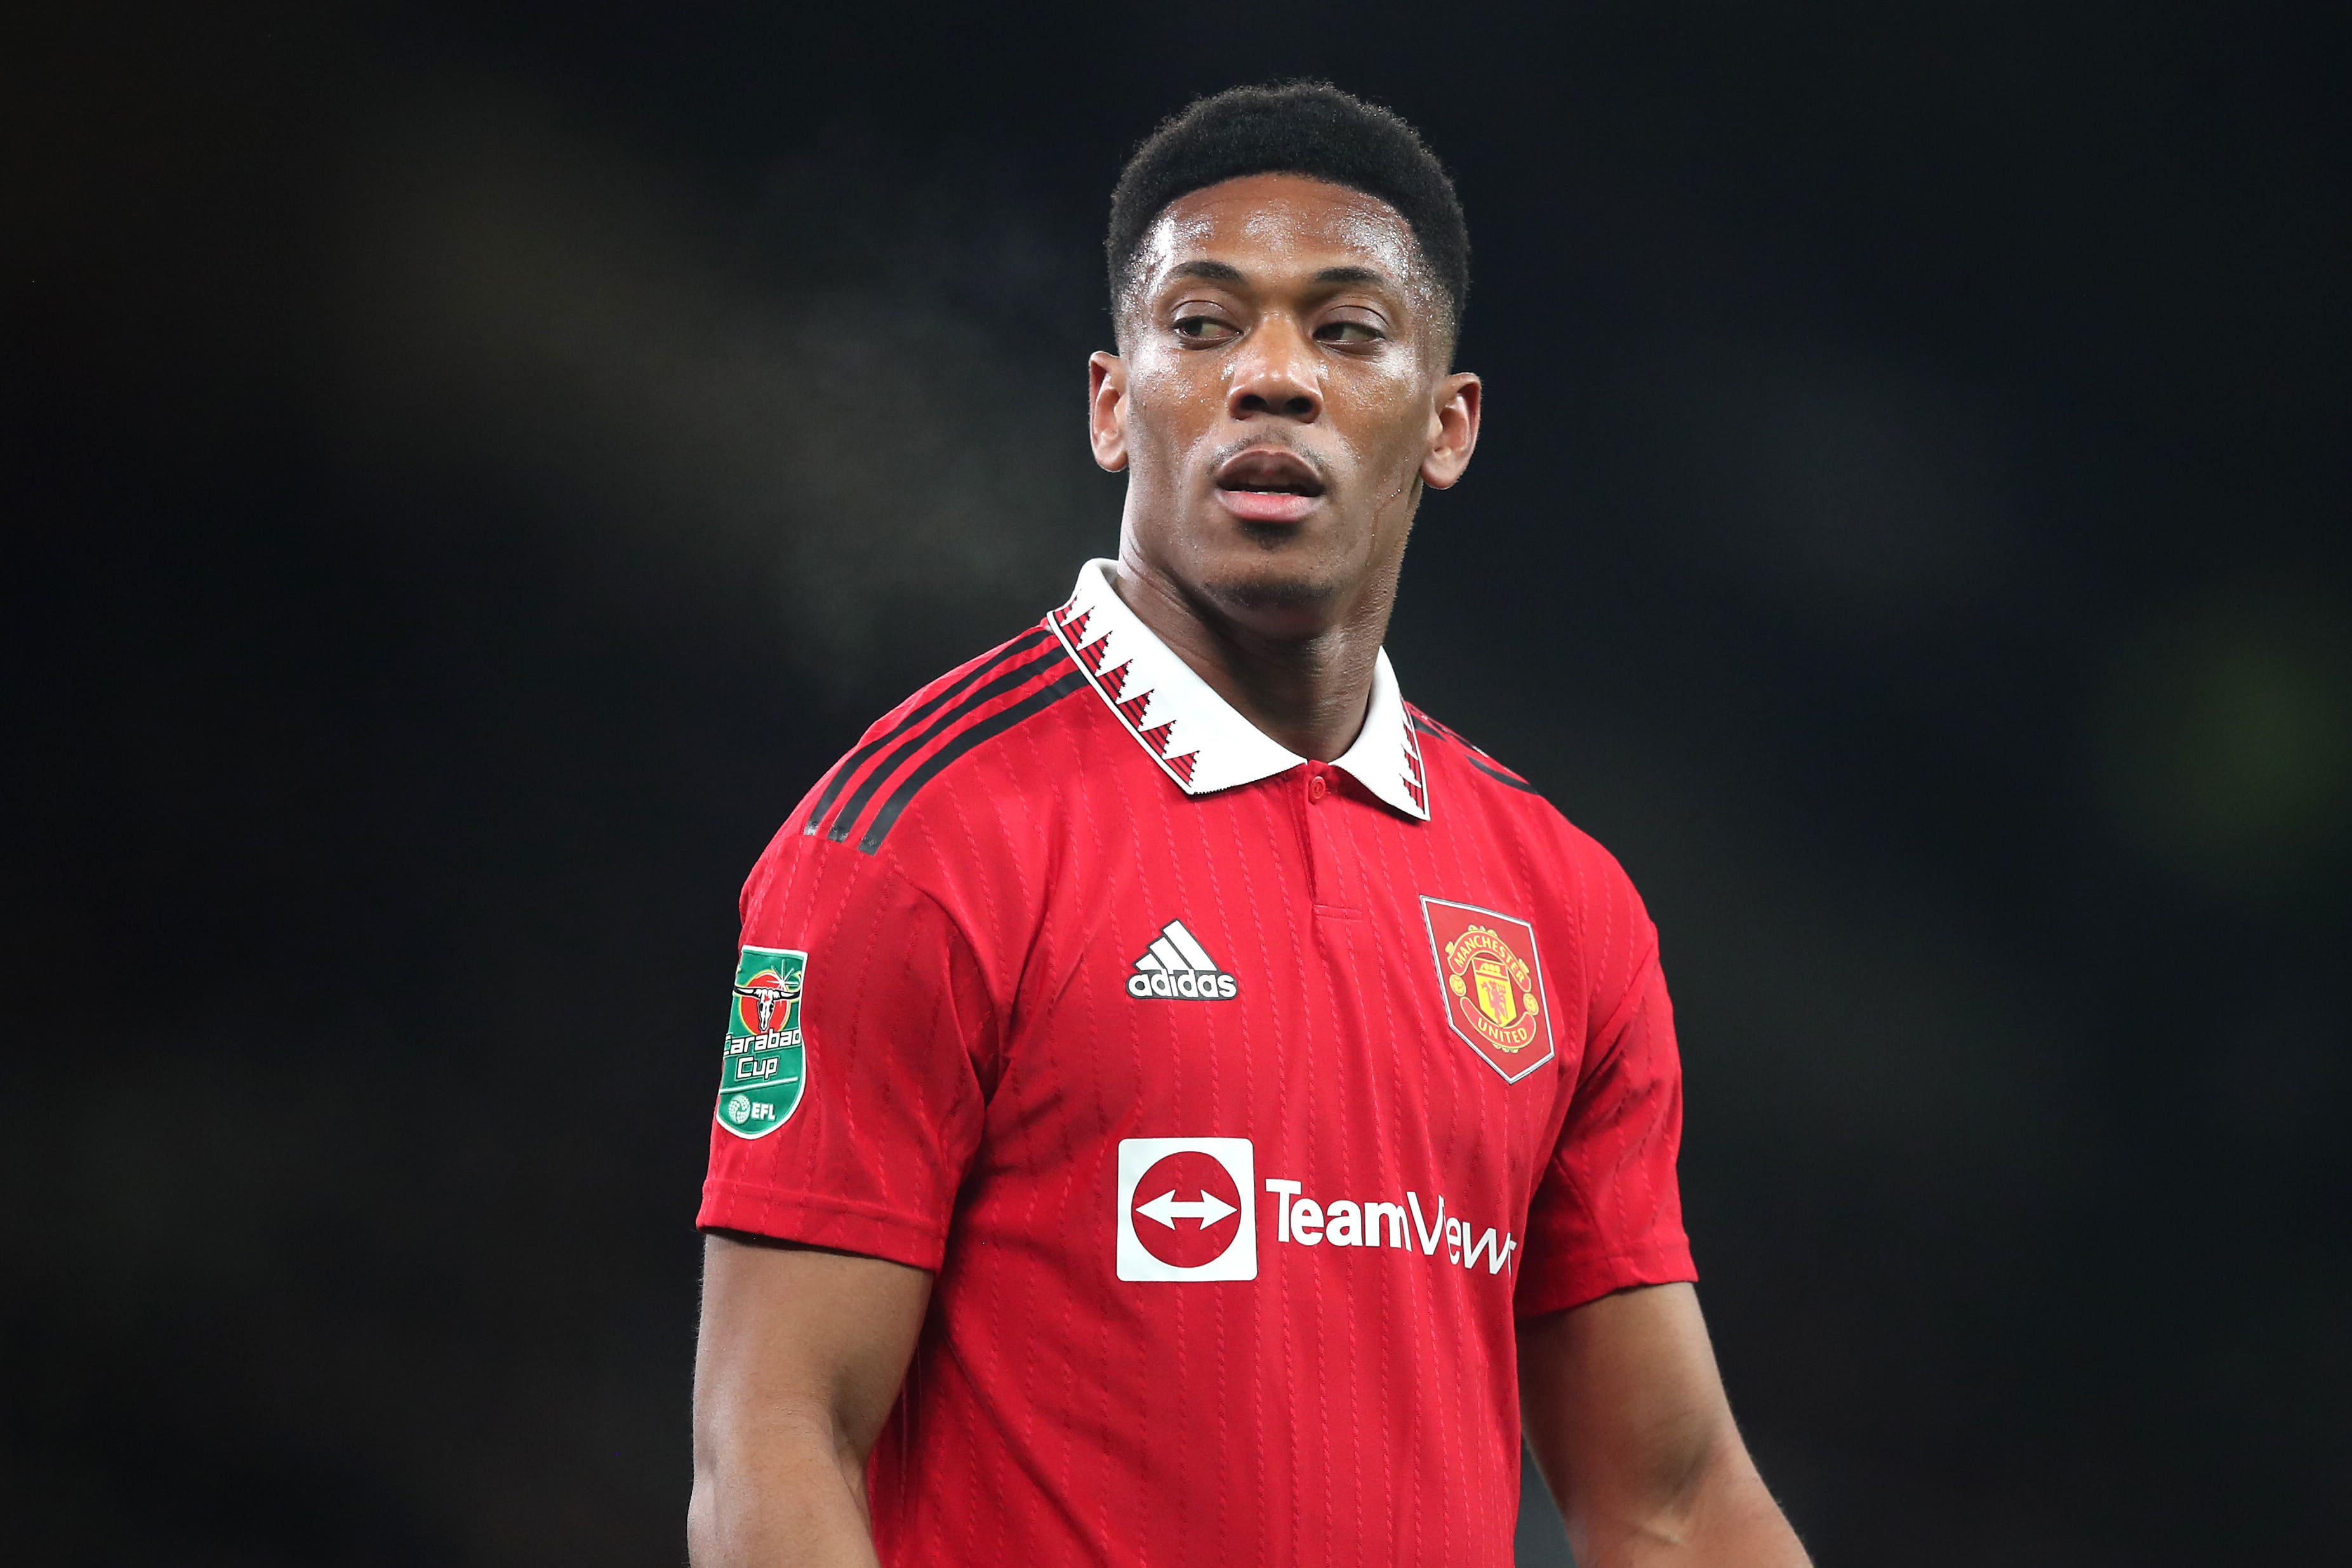 Manchester United’s Anthony Martial ruled out of FA Cup final through